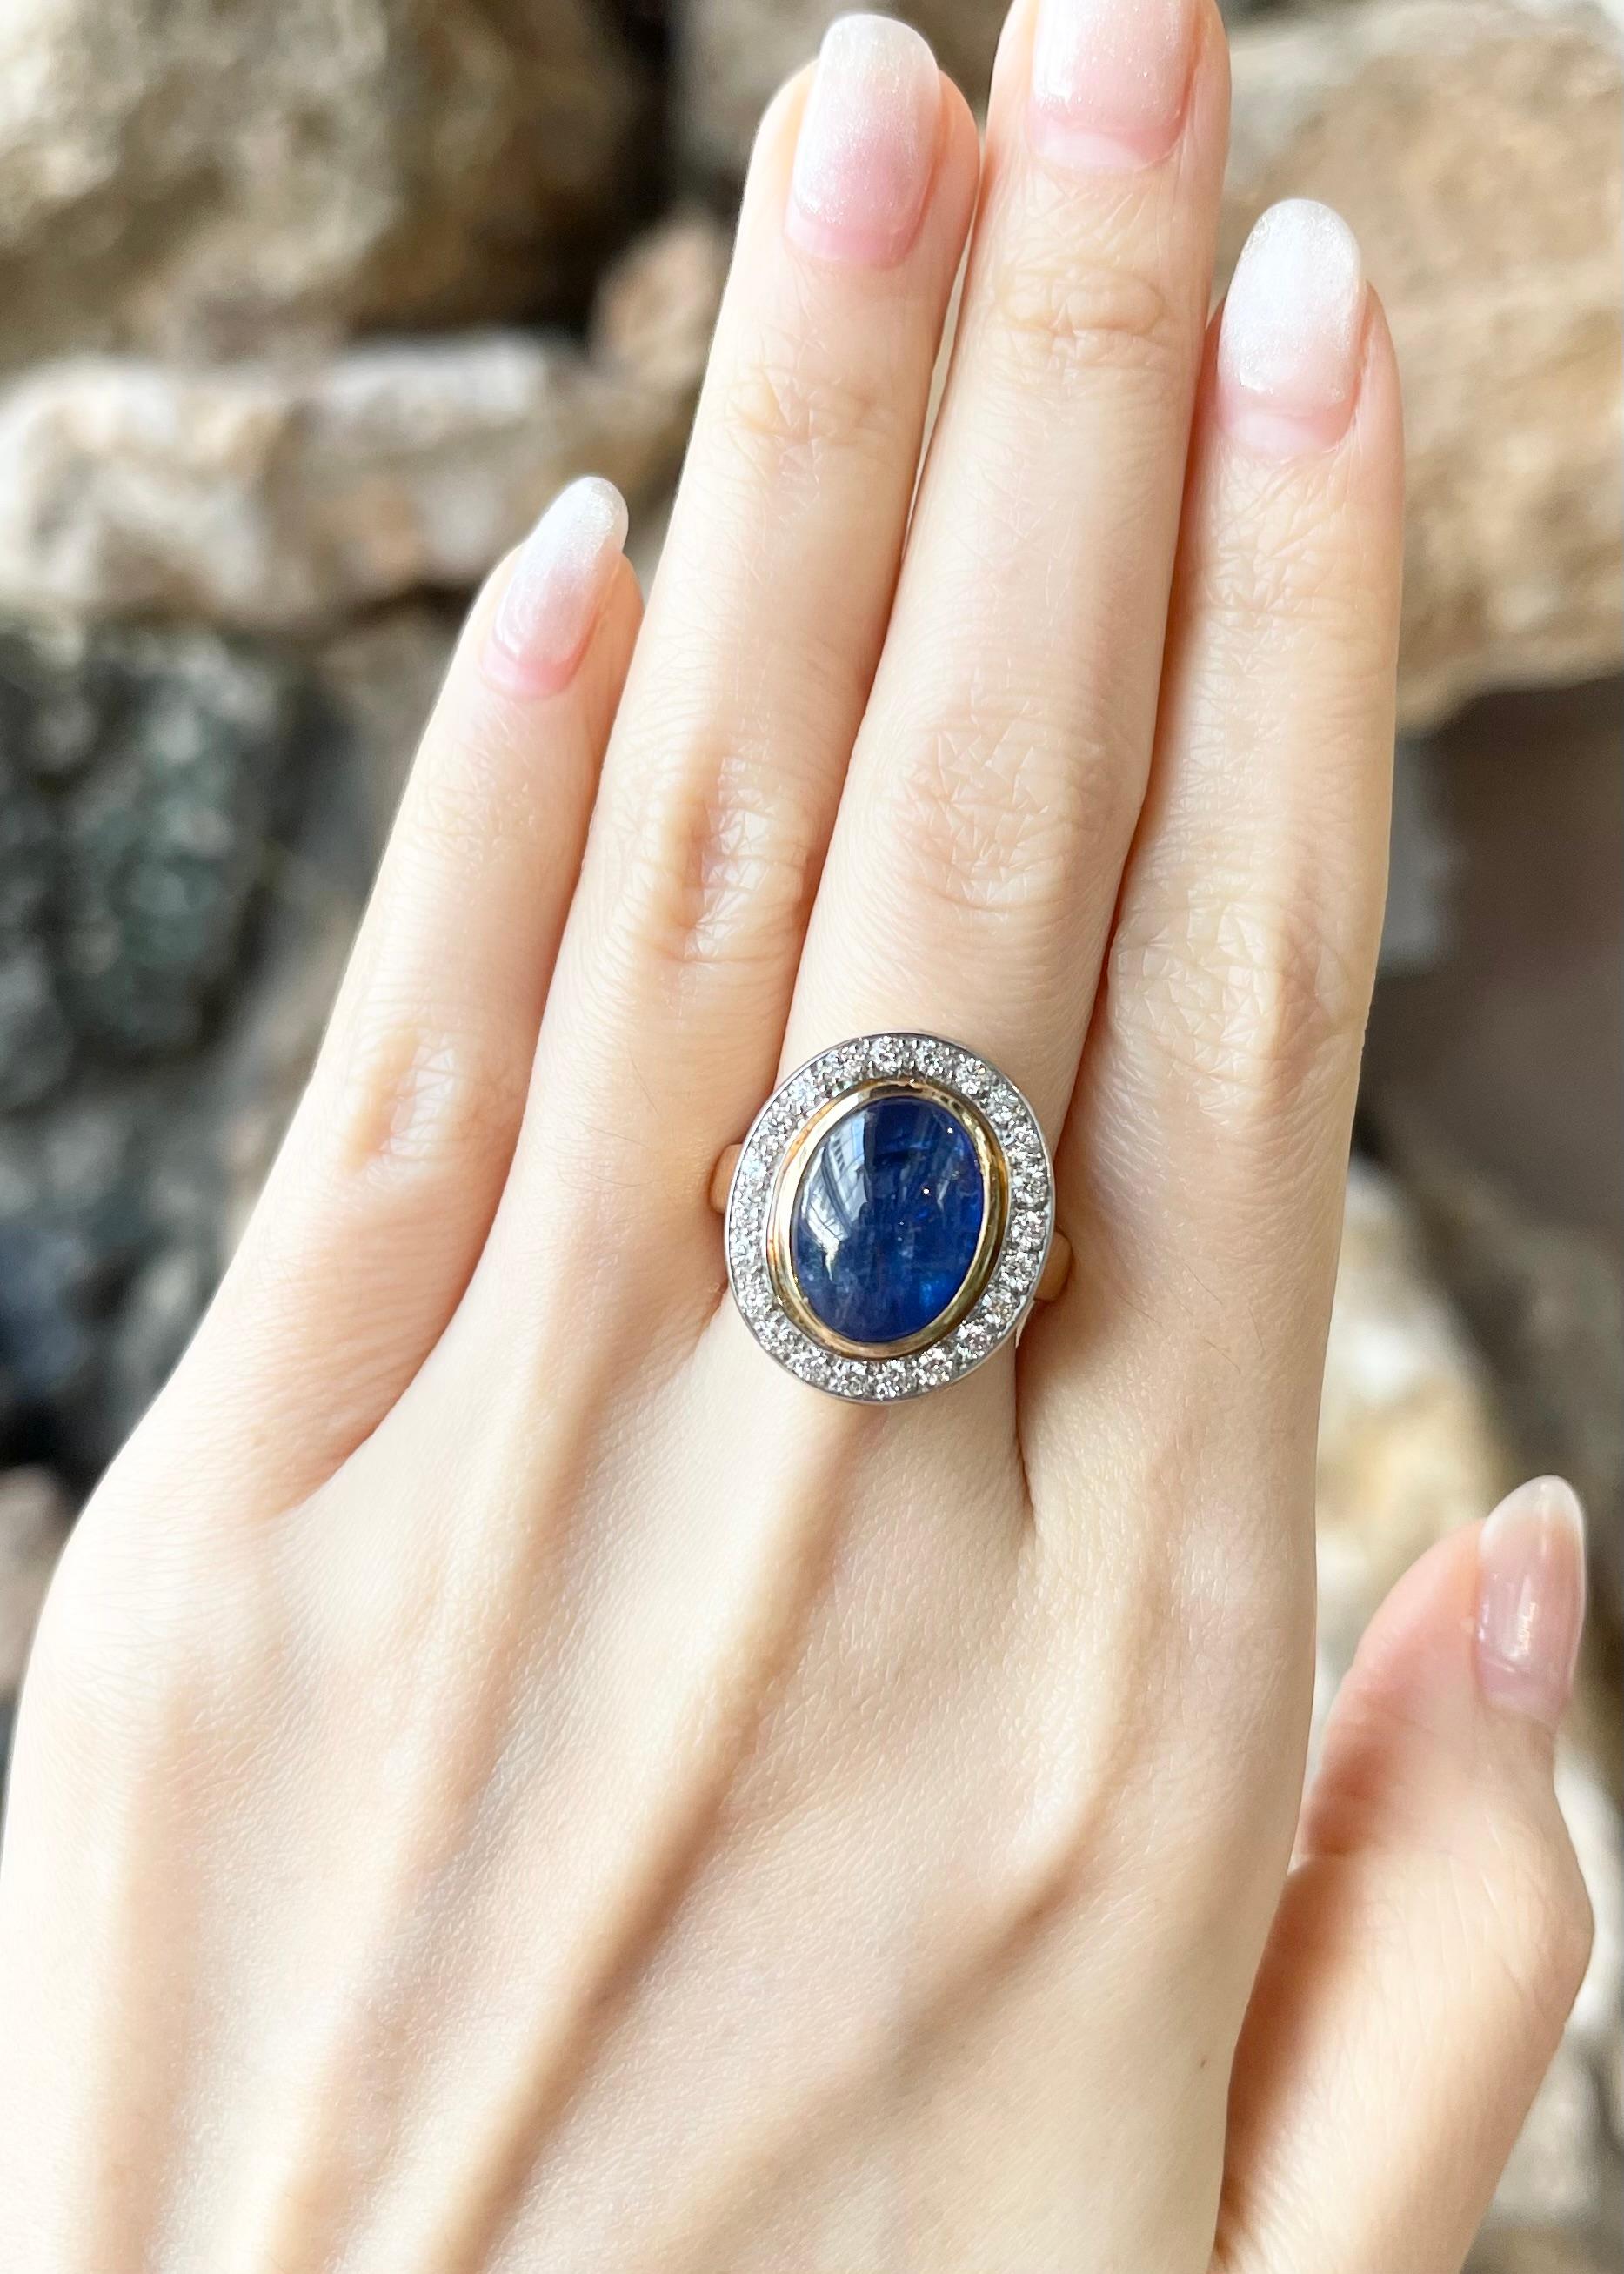 Cabochon Blue Sapphire 7.42 carats with Diamond 0.56 carat Ring set in 18K Gold Settings

Width:  1.7 cm 
Length: 2.1 cm
Ring Size: 52
Total Weight: 12.32 grams

